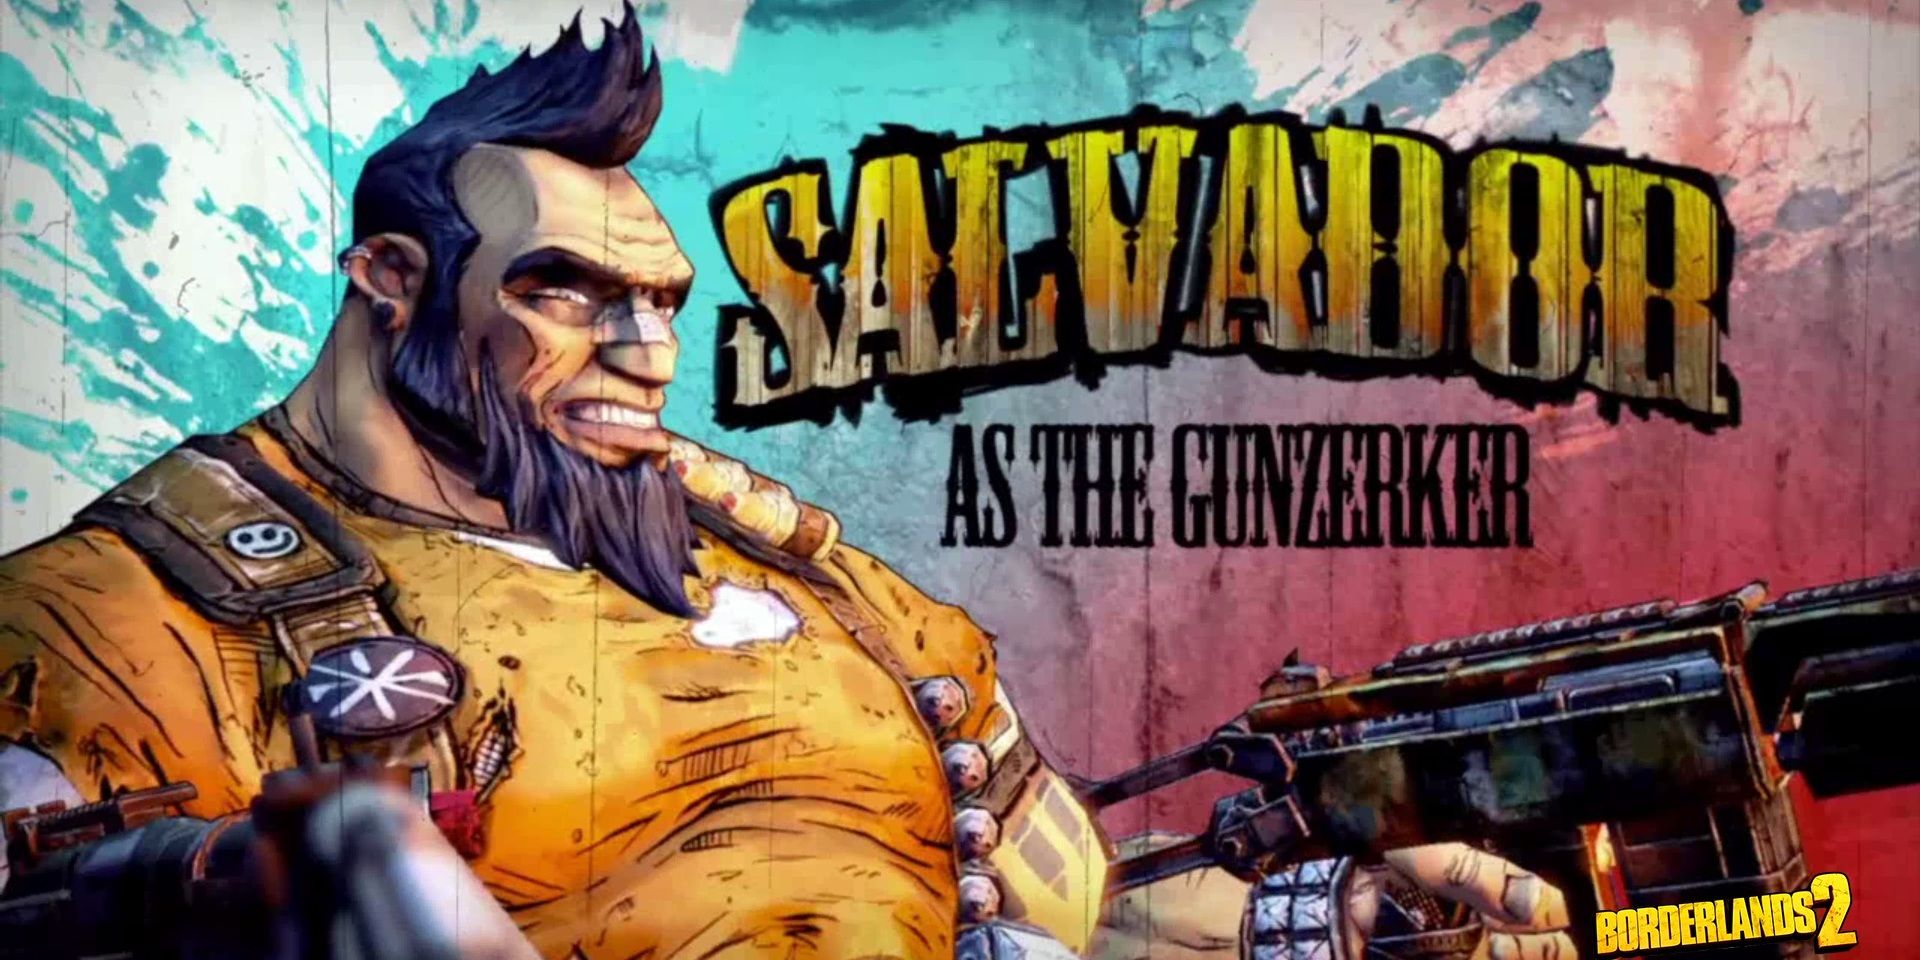 Salvador from the Borderlands series